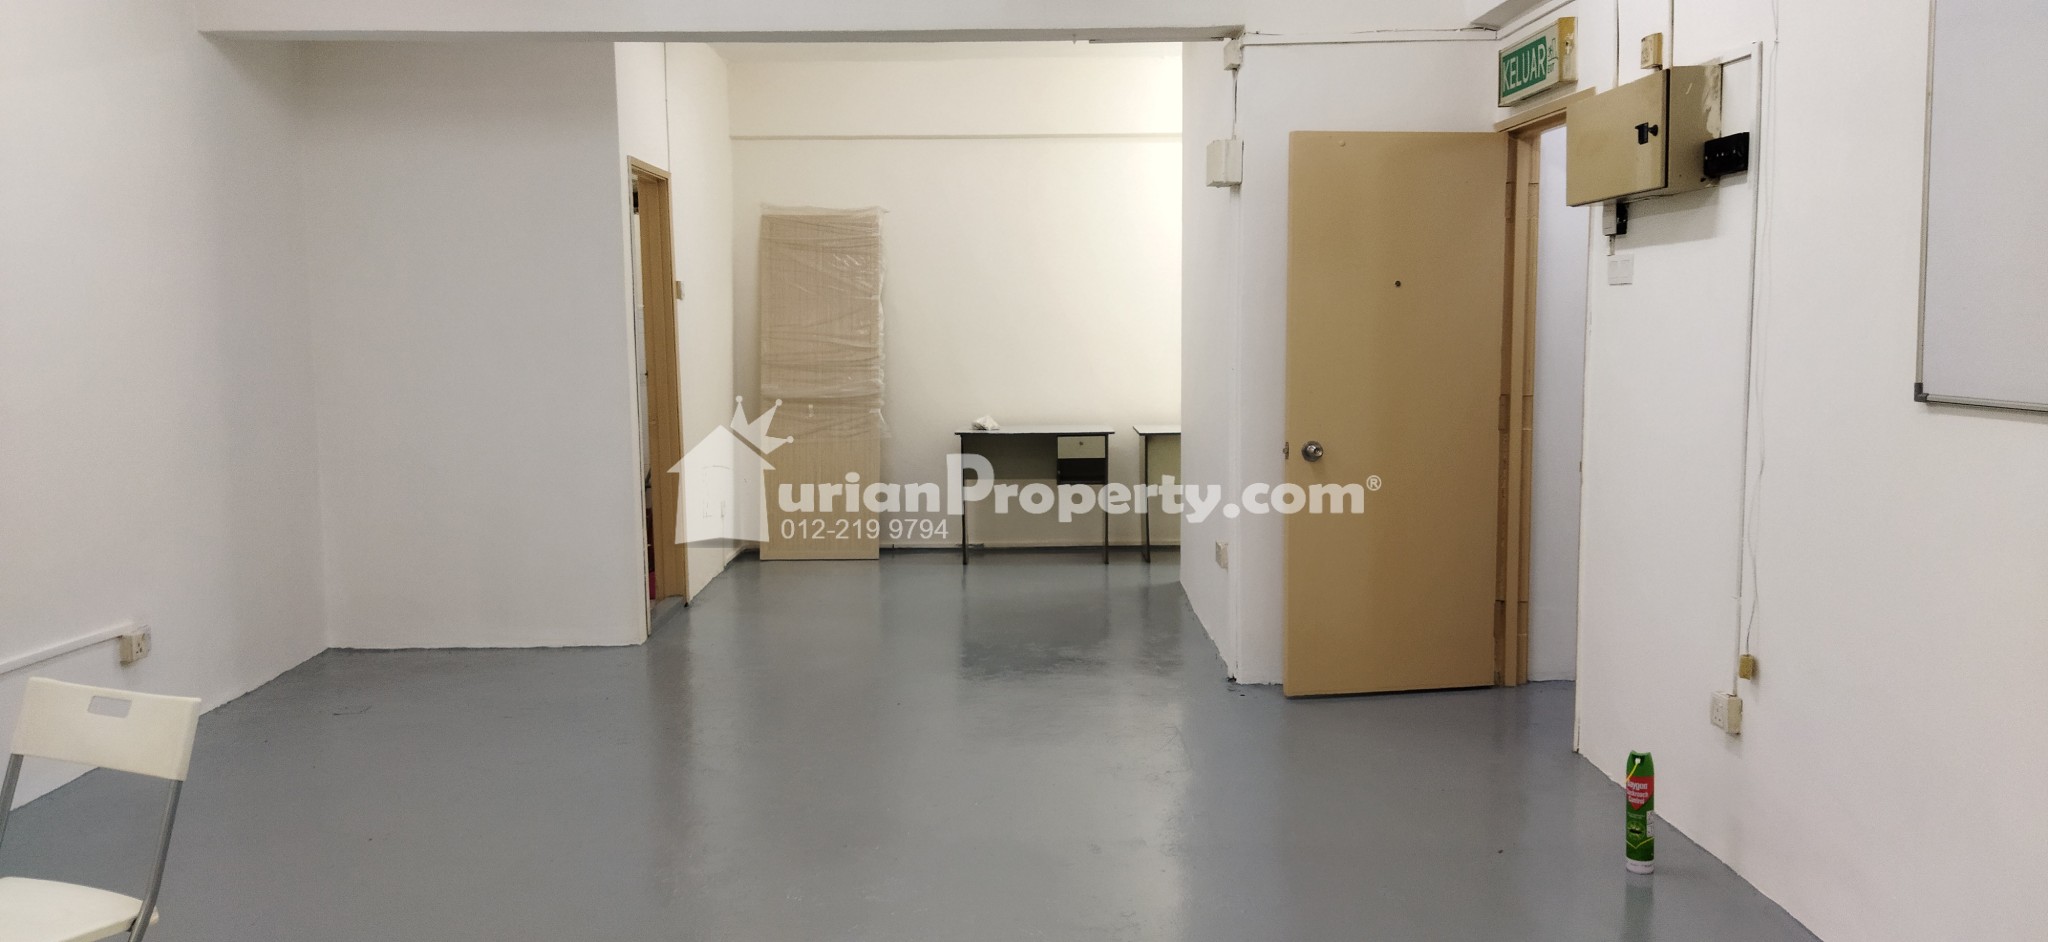 Office For Rent at Wisma Mutiara Puchong